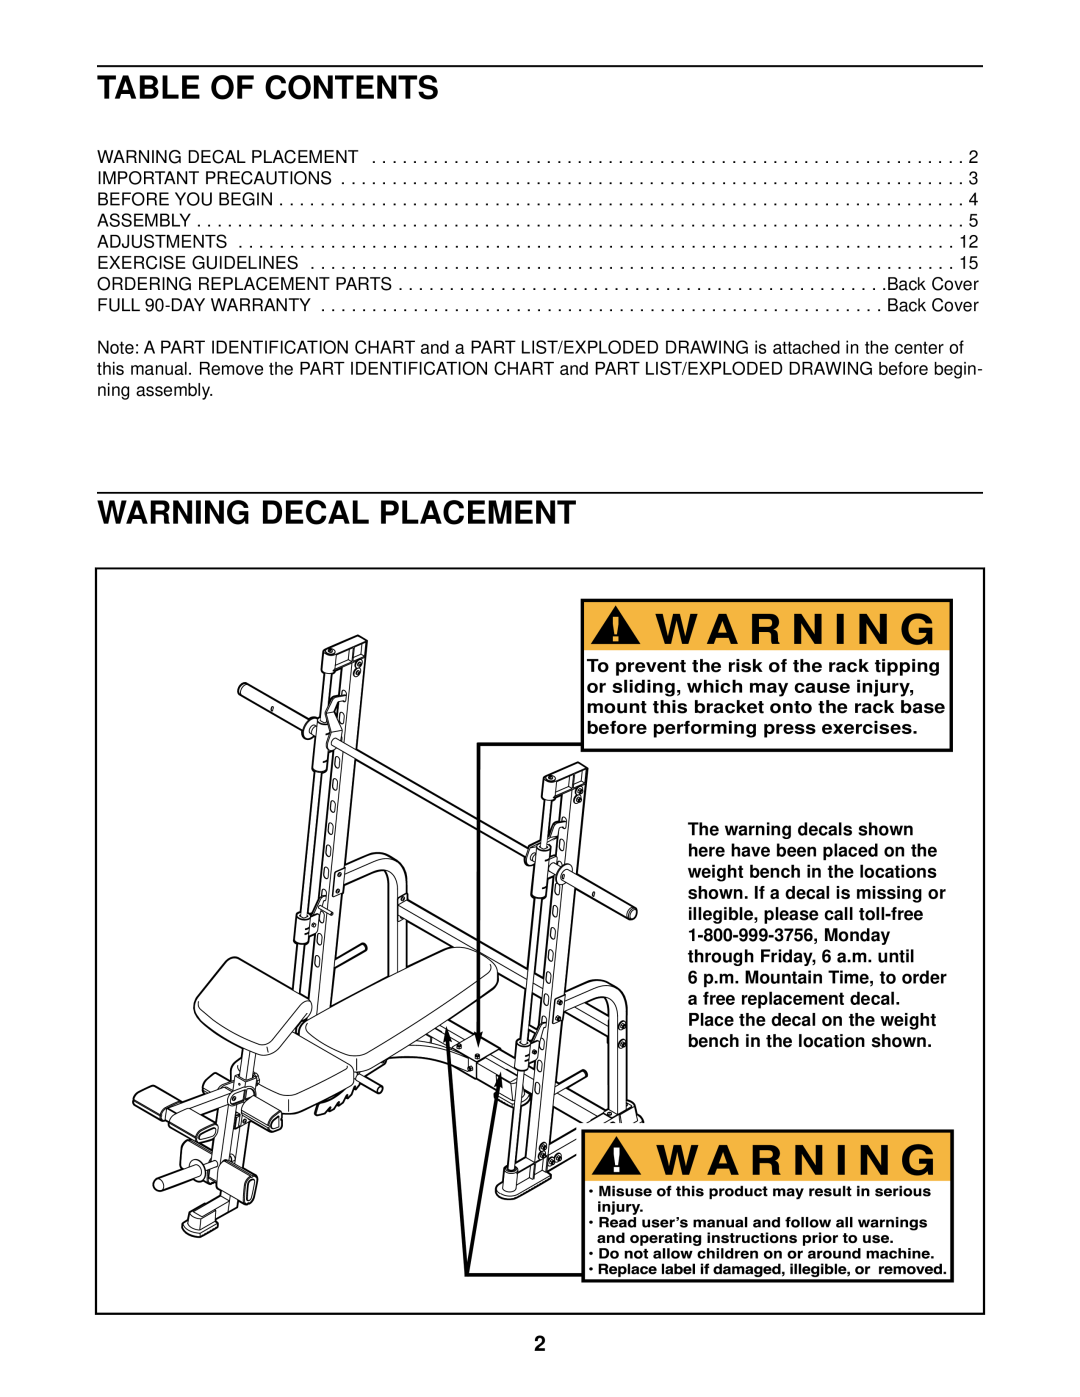 ProForm 831.150330, C800 user manual Table Of Contents, Warning Decal Placement, W A R N I N G 